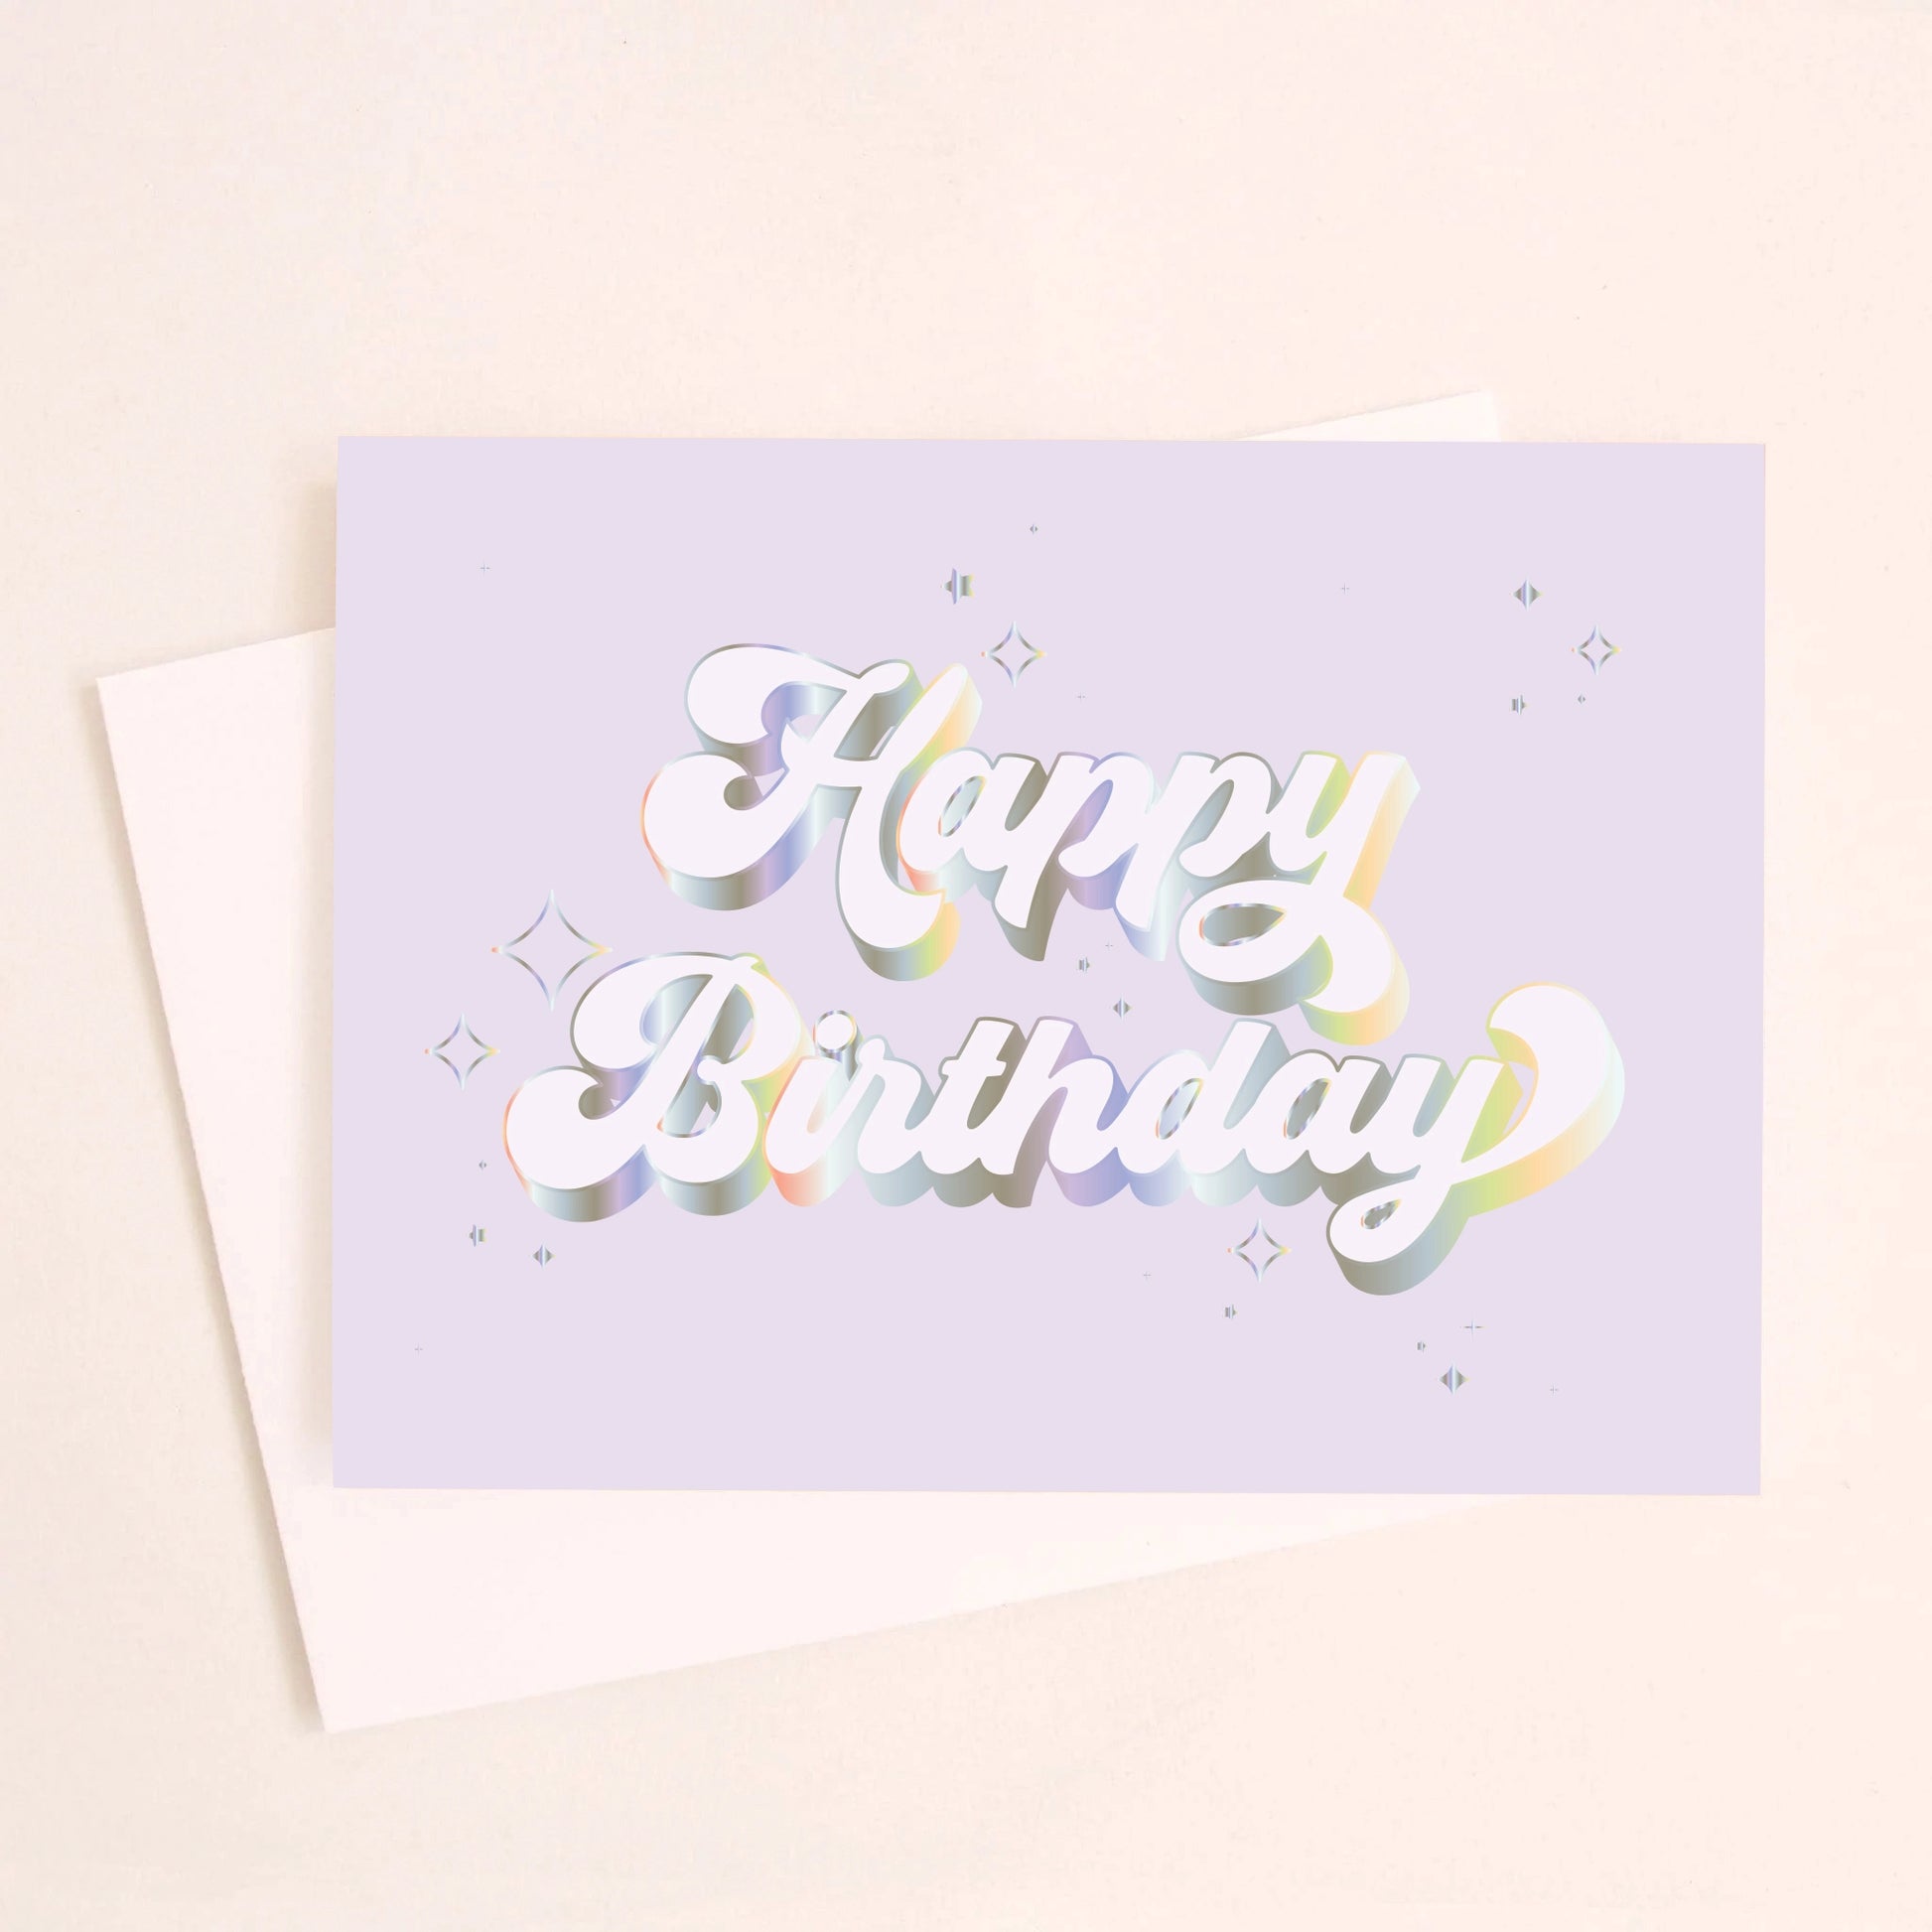 On an ivory background is a light purple/blue greeting card with white / holographic outlined text that reads, "Happy Birthday" along with a white envelope. 